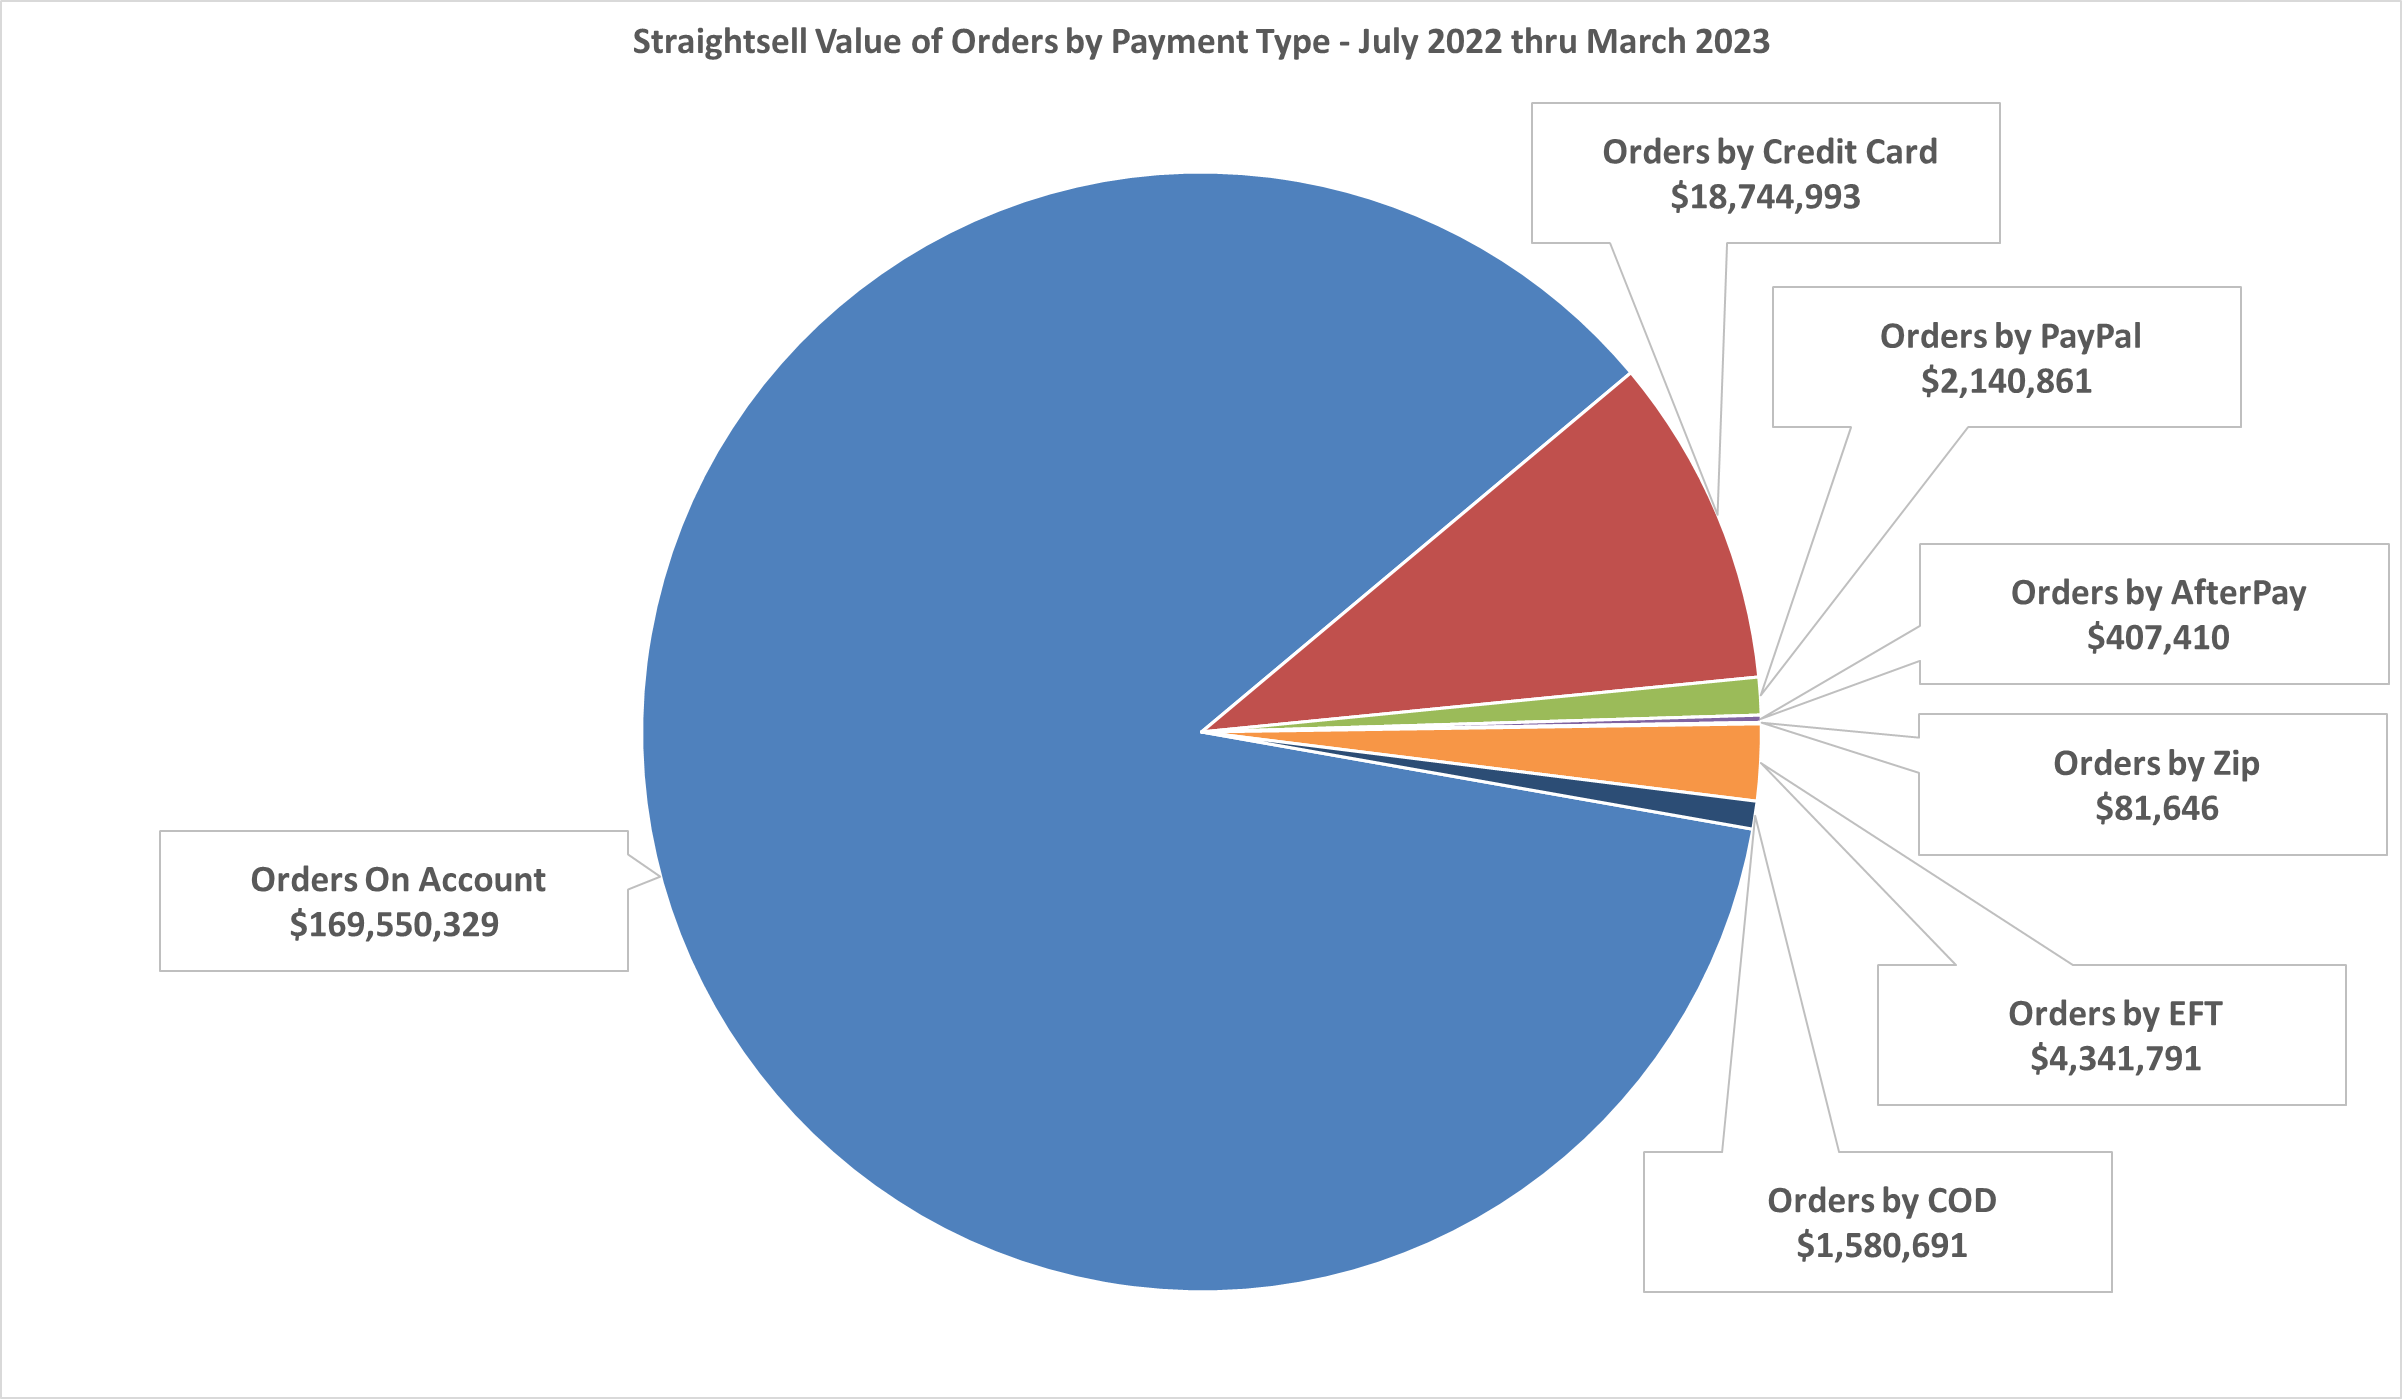 Straightsell Value of Orders by Payment Type - July 2022 thru March 2023